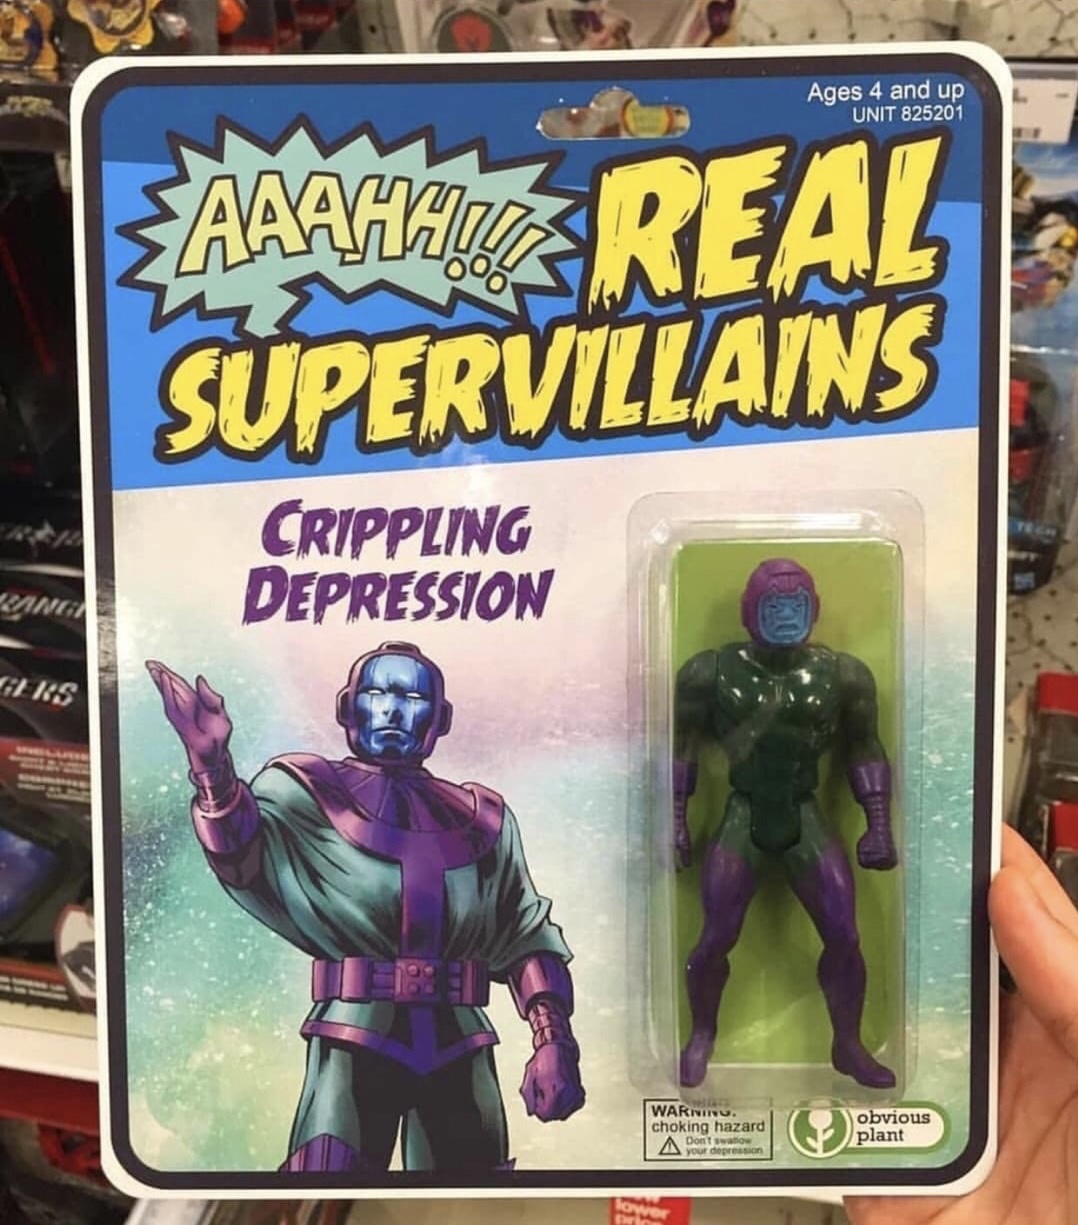 real supervillains crippling depression - Ages 4 and up Unit 825201 Eaaahhy Real Supervillains Crippling Depression Lks Warninu. choking hazard obvious plant A Dont wat your depression